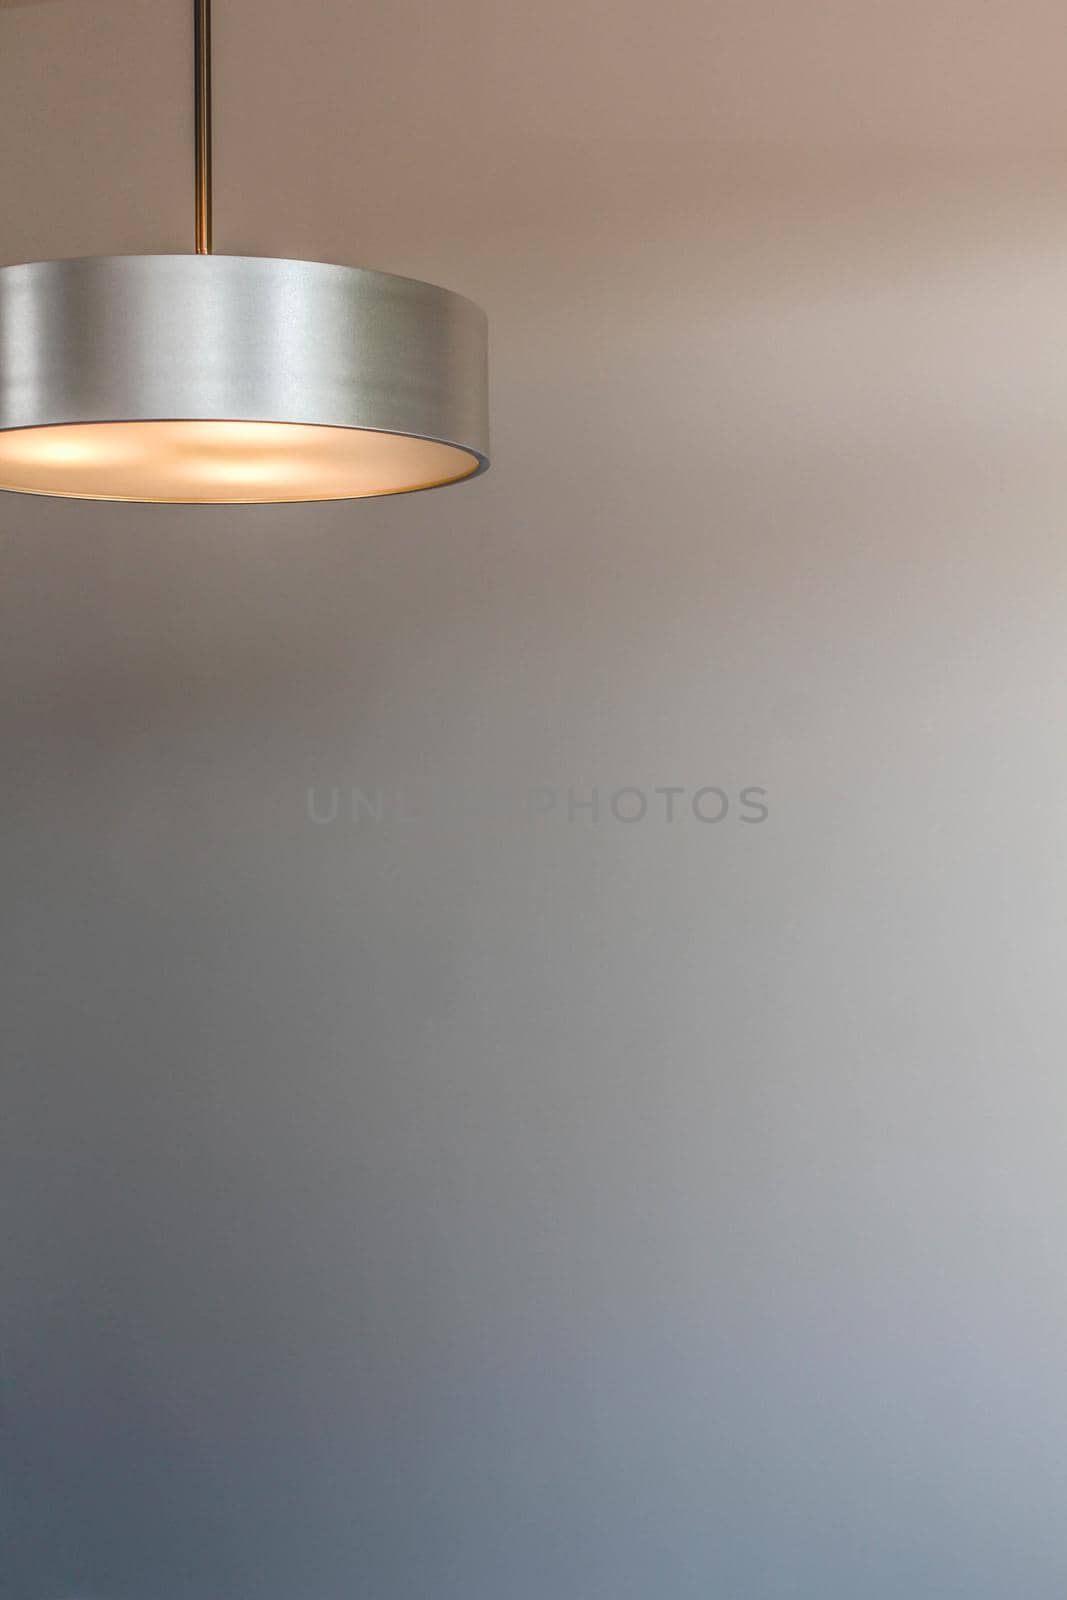 Glowing modern aluminum led lamp with white wall. Free space for text or design. by JuliaDorian